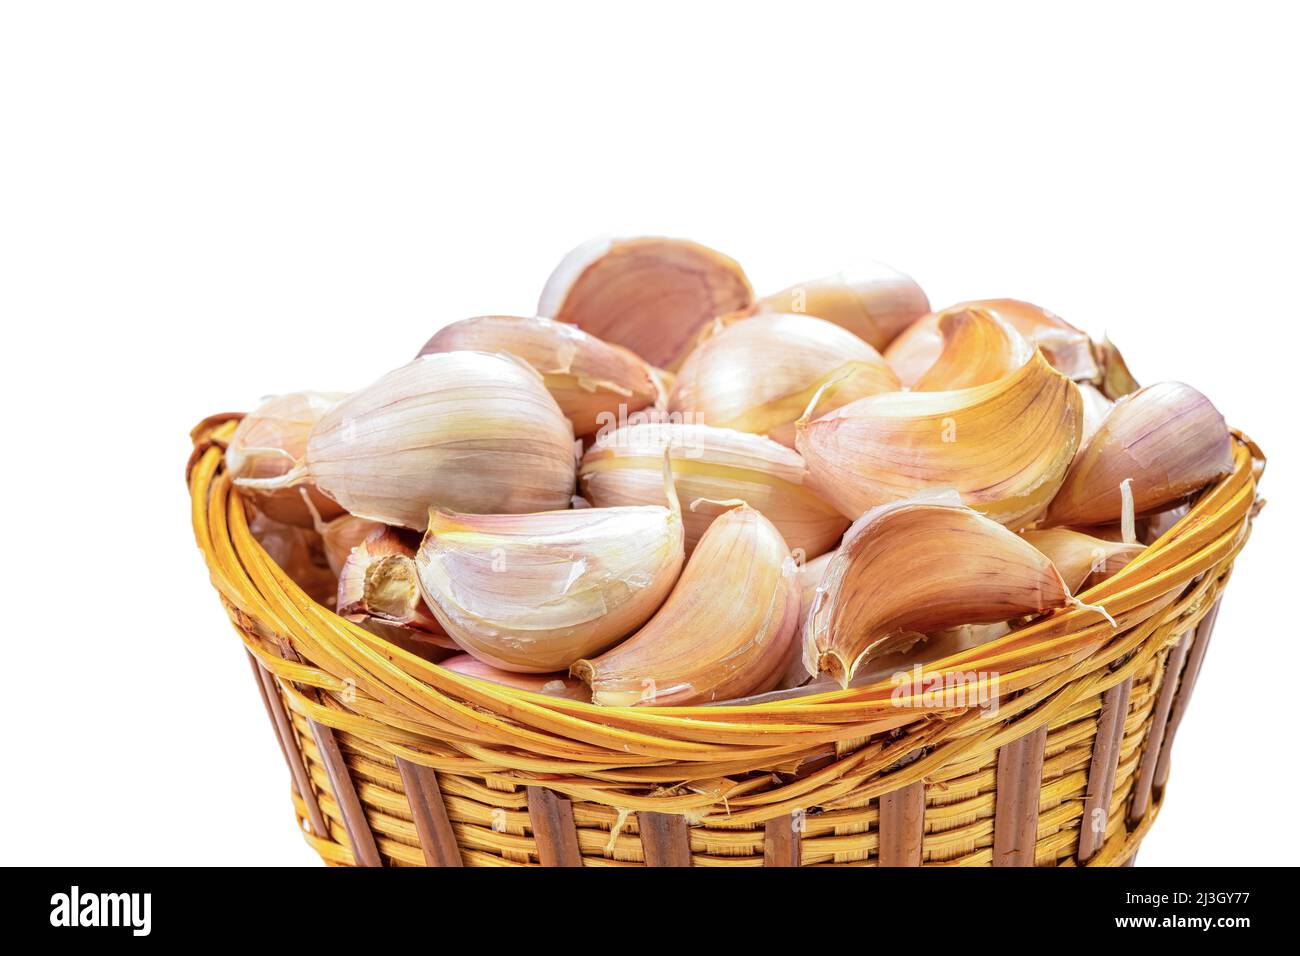 Whole garlic cloves in a white background. Stock Photo